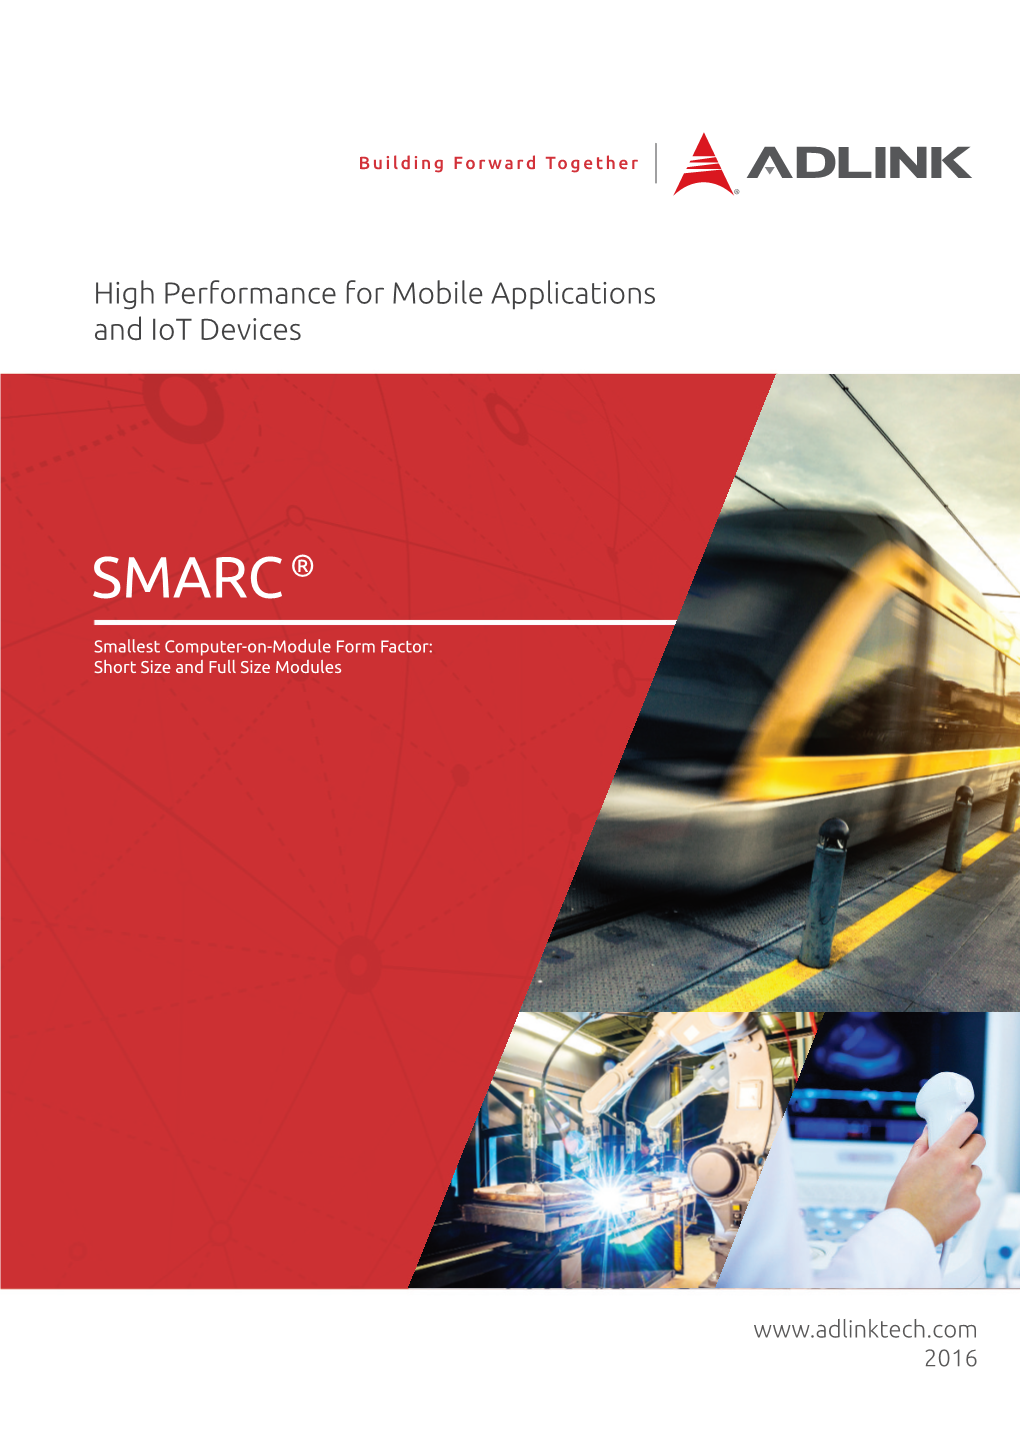 High Performance for Mobile Applications and Iot Devices